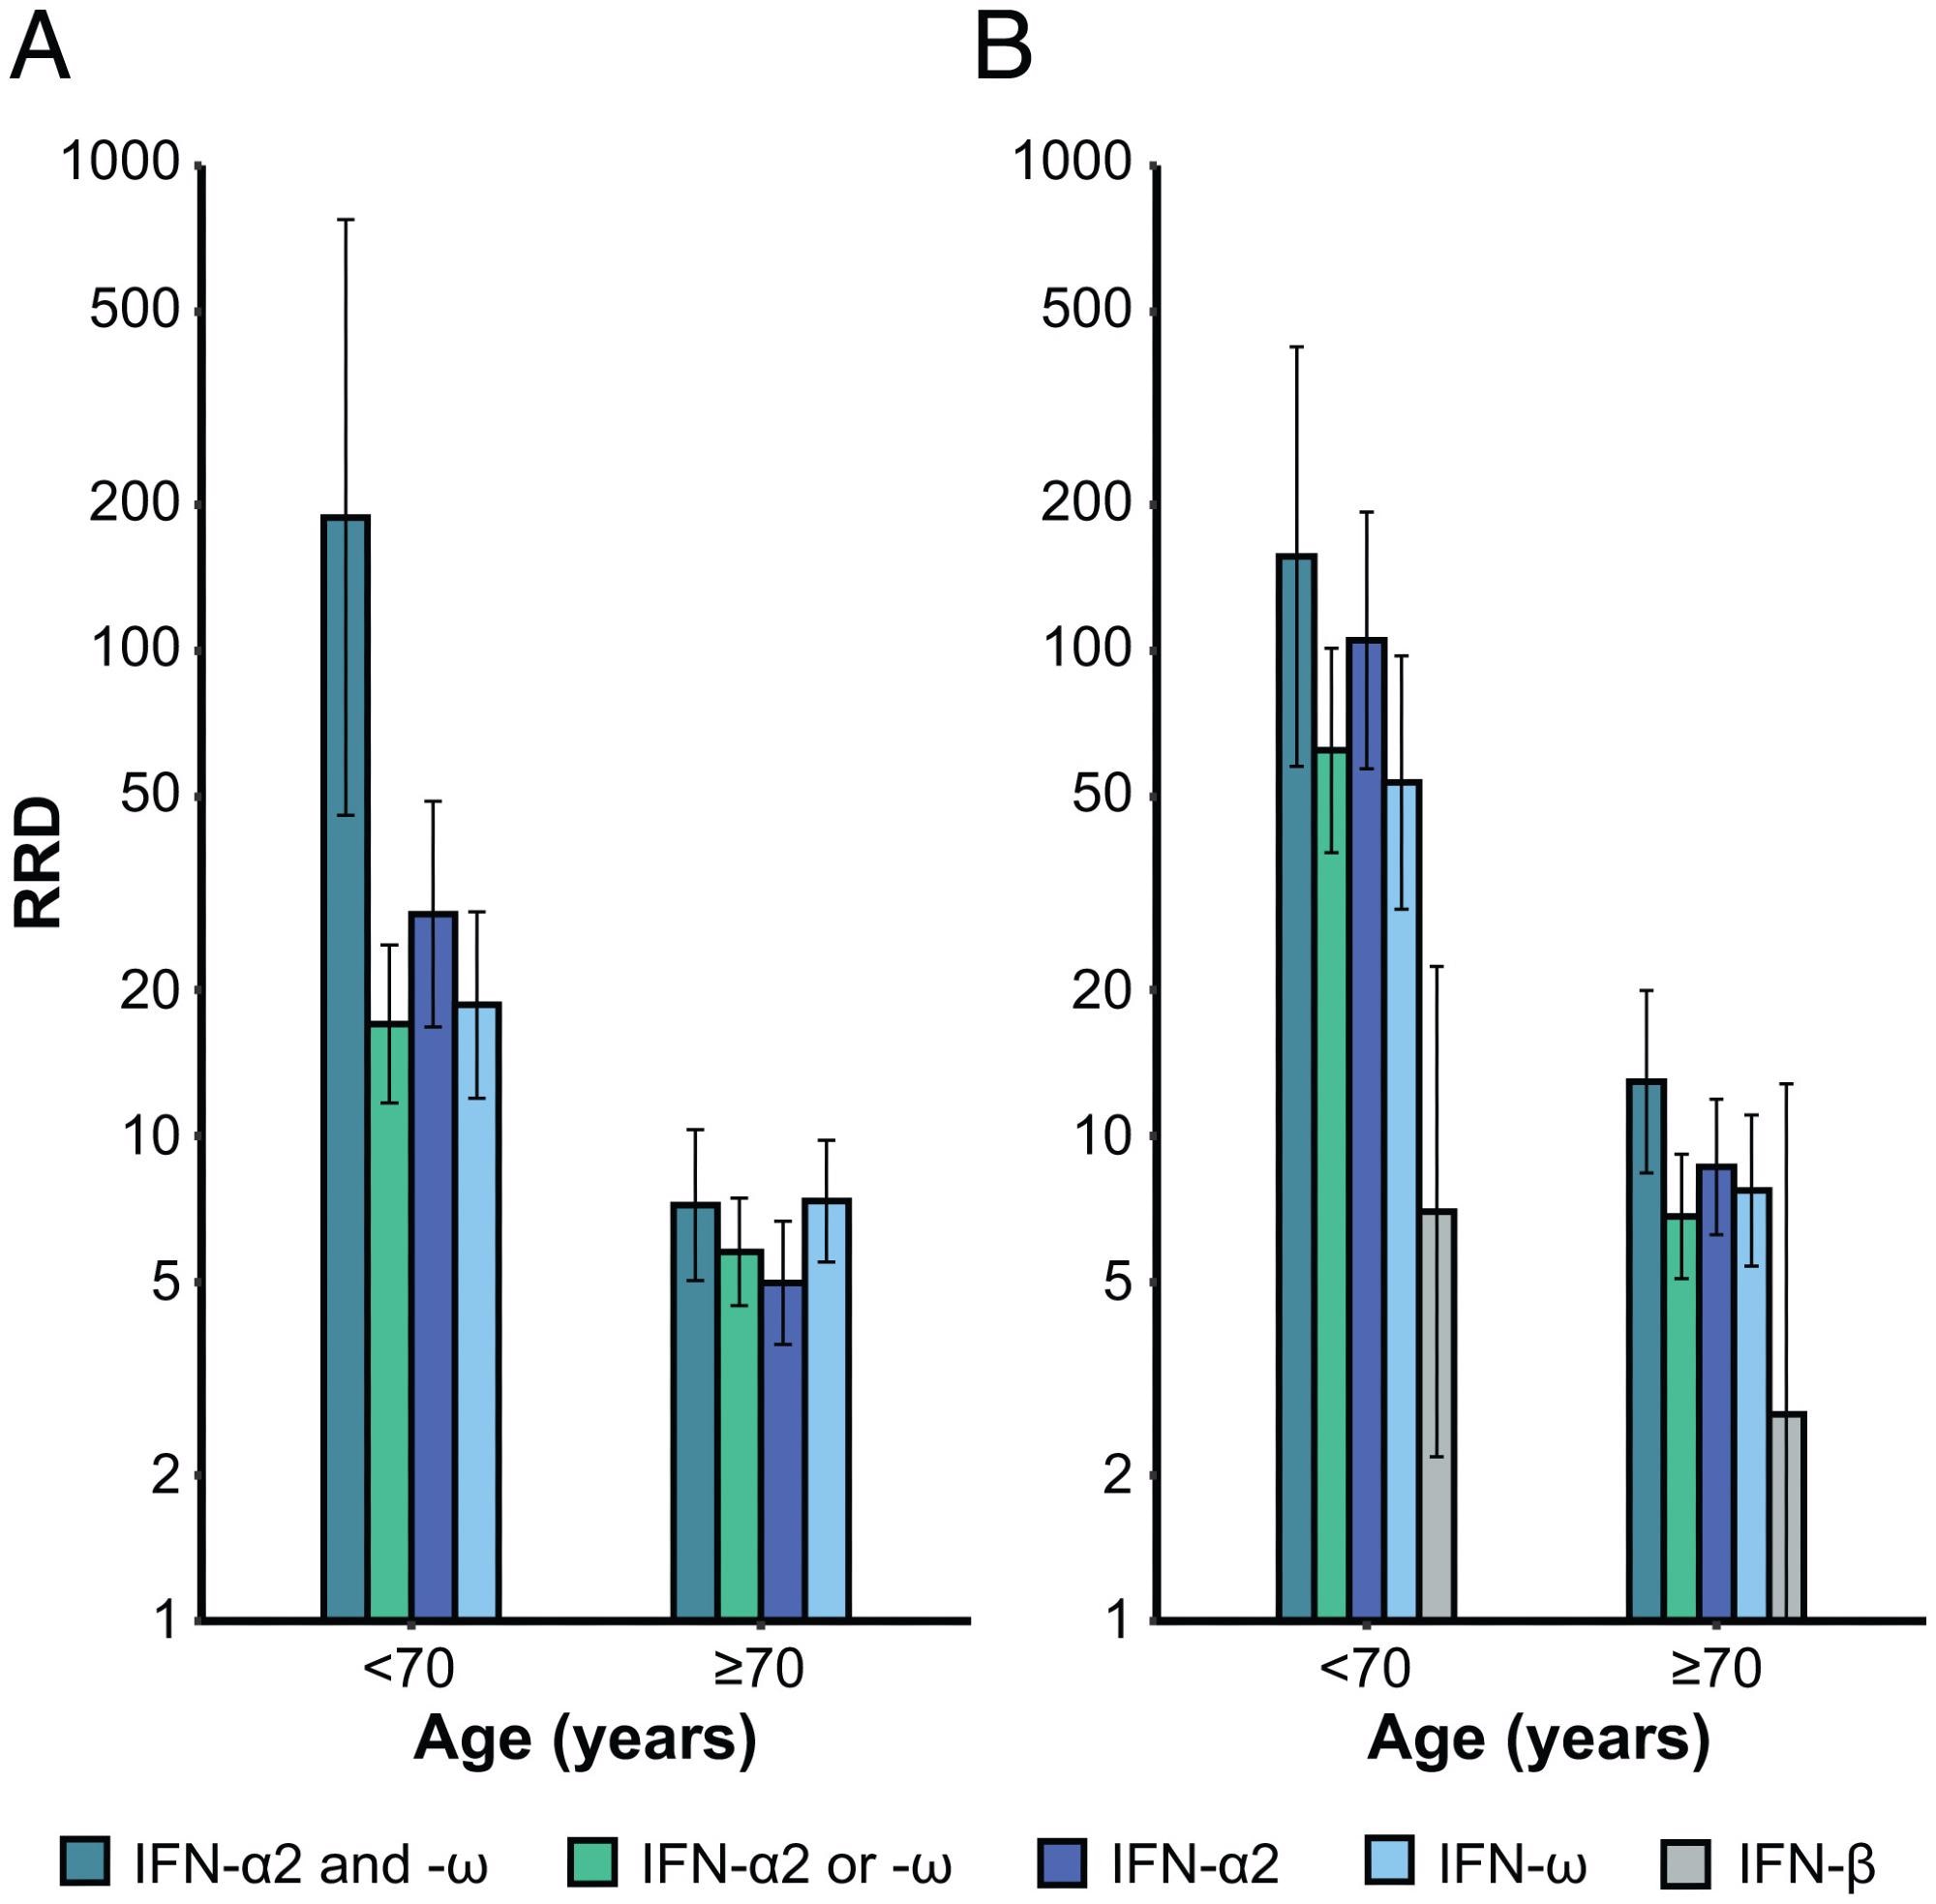 ​​​​​​​RRDs for individuals with auto-Abs neutralizing different combinations of type I IFNs relative to individuals without such auto-Abs, by age. RRDs are displayed on a logarithmic scale for individuals under and over 70 y of age with (A) auto-Abs neutralizing low concentrations of IFN-α2 and IFN-ω, IFN-α2 or IFN-ω, IFN-α2, and IFN-ω and (B) auto-Abs neutralizing high concentrations of IFN-α2 and IFN-ω, IFN-α2 or IFN-ω, IFN-α2, IFN-ω, and IFN-β, relative to individuals without such combinations of auto-Abs. Vertical bars represent the 95% CI.